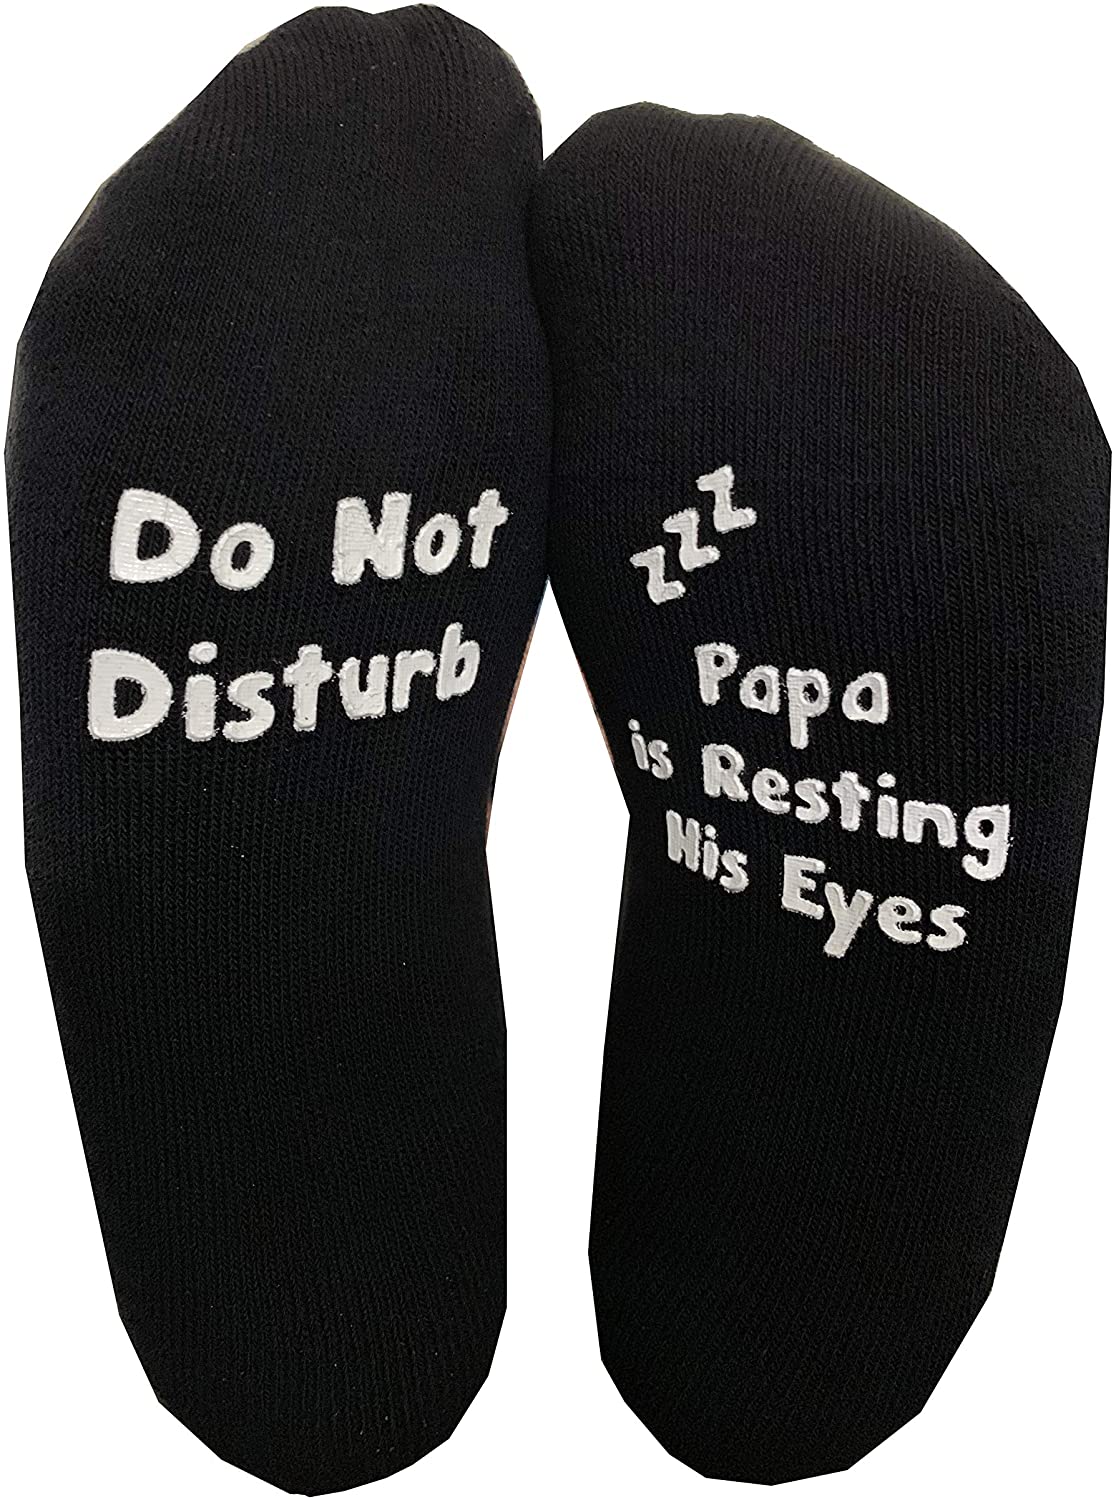 25-gifts-for-new-grandparents-socks-for-pap